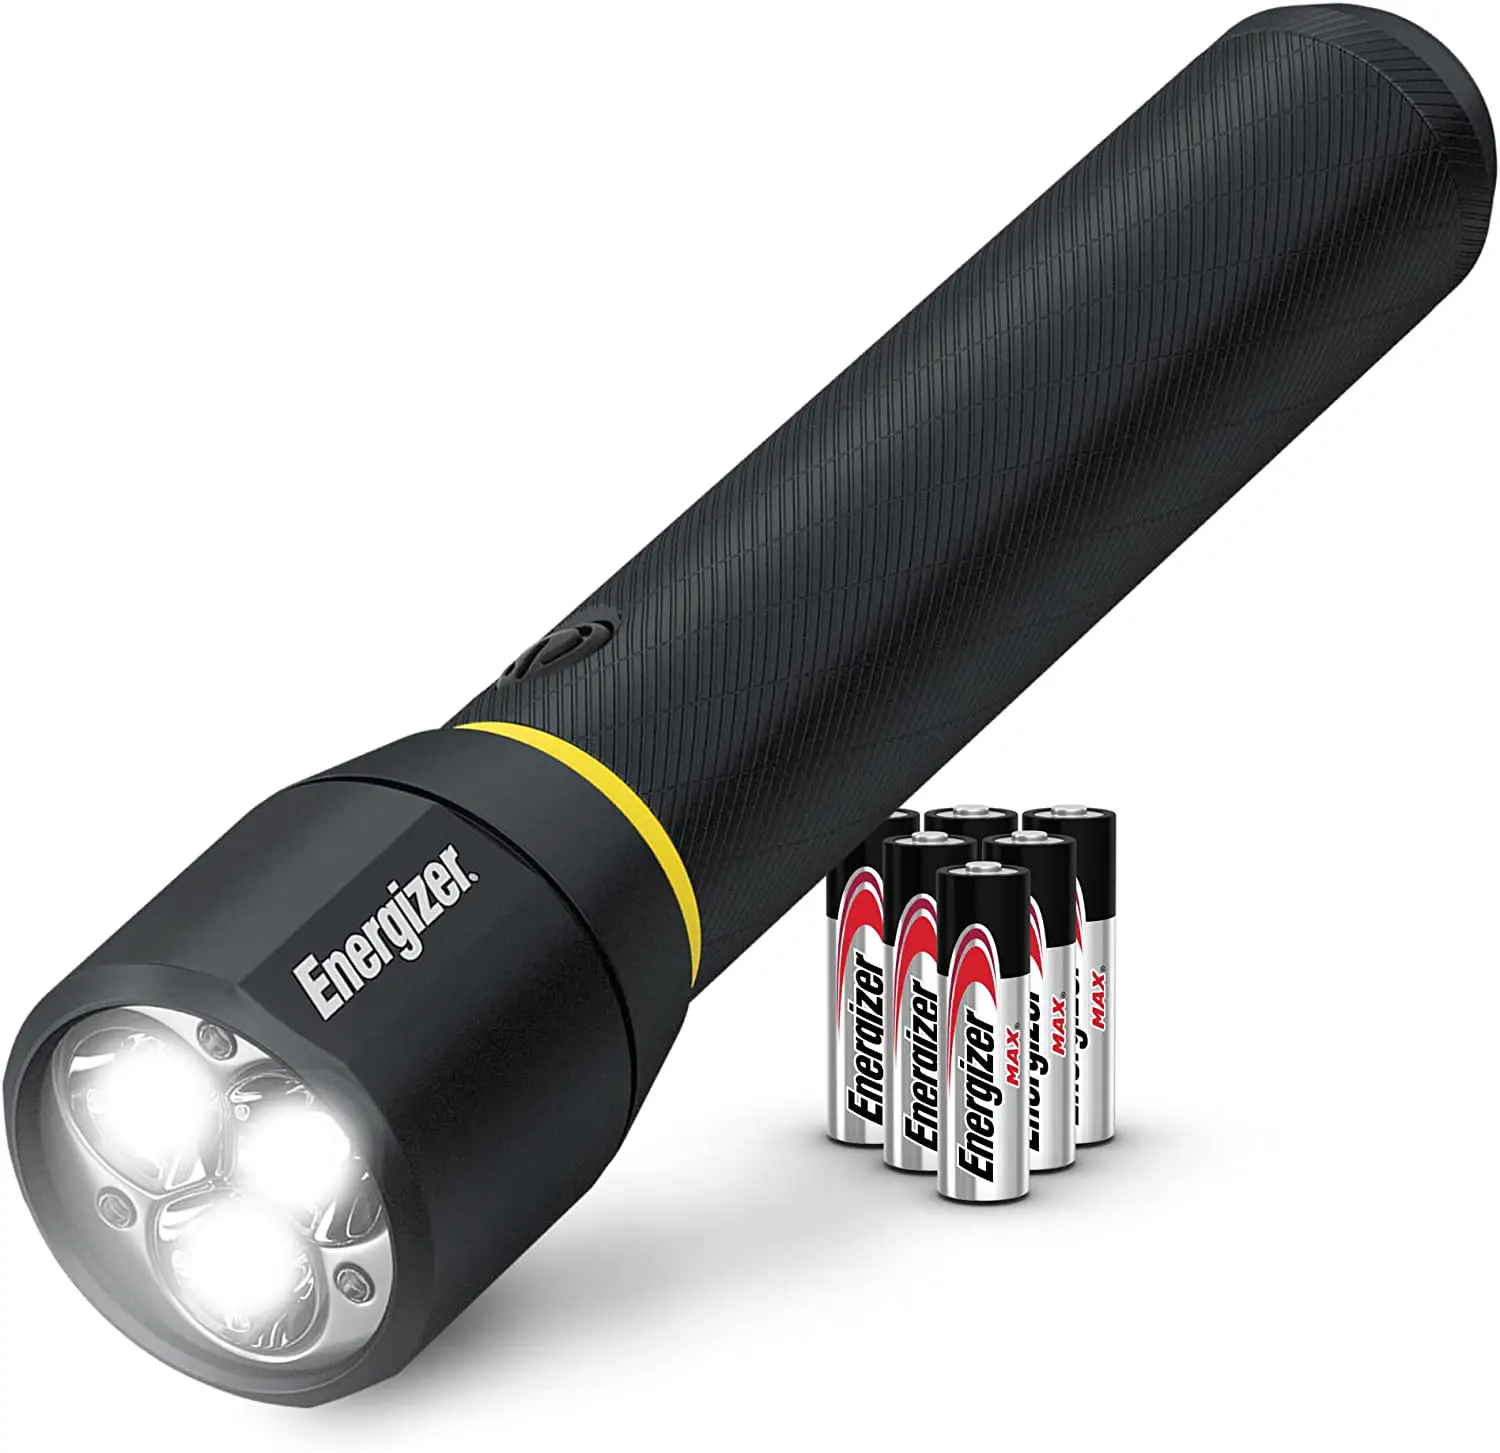 black Energizer flashlight propped up on a back of batteries